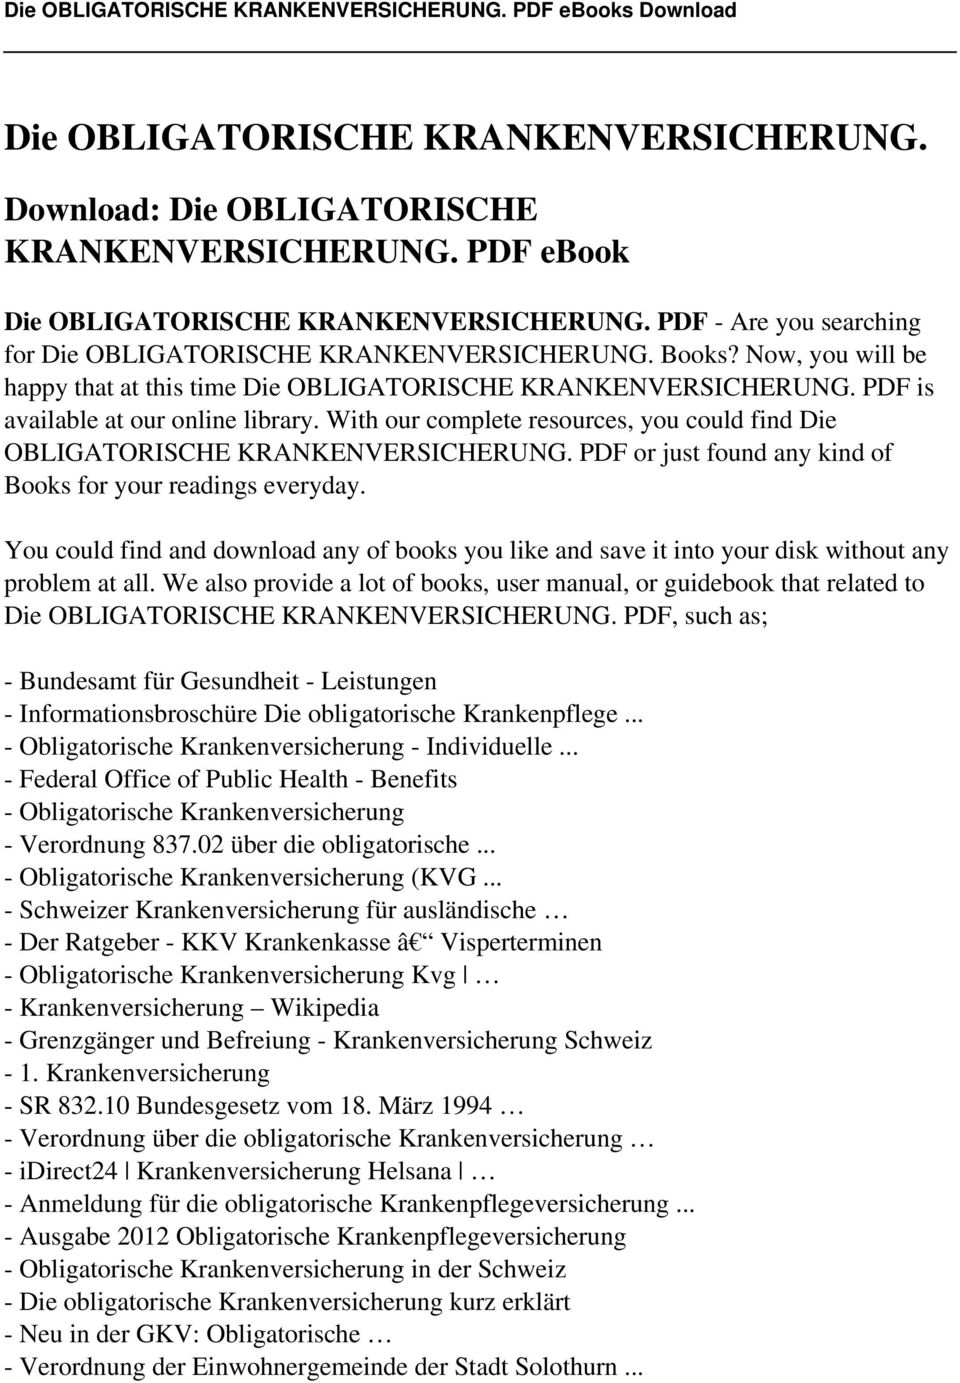 With our complete resources, you could find Die OBLIGATORISCHE KRANKENVERSICHERUNG. PDF or just found any kind of Books for your readings everyday.